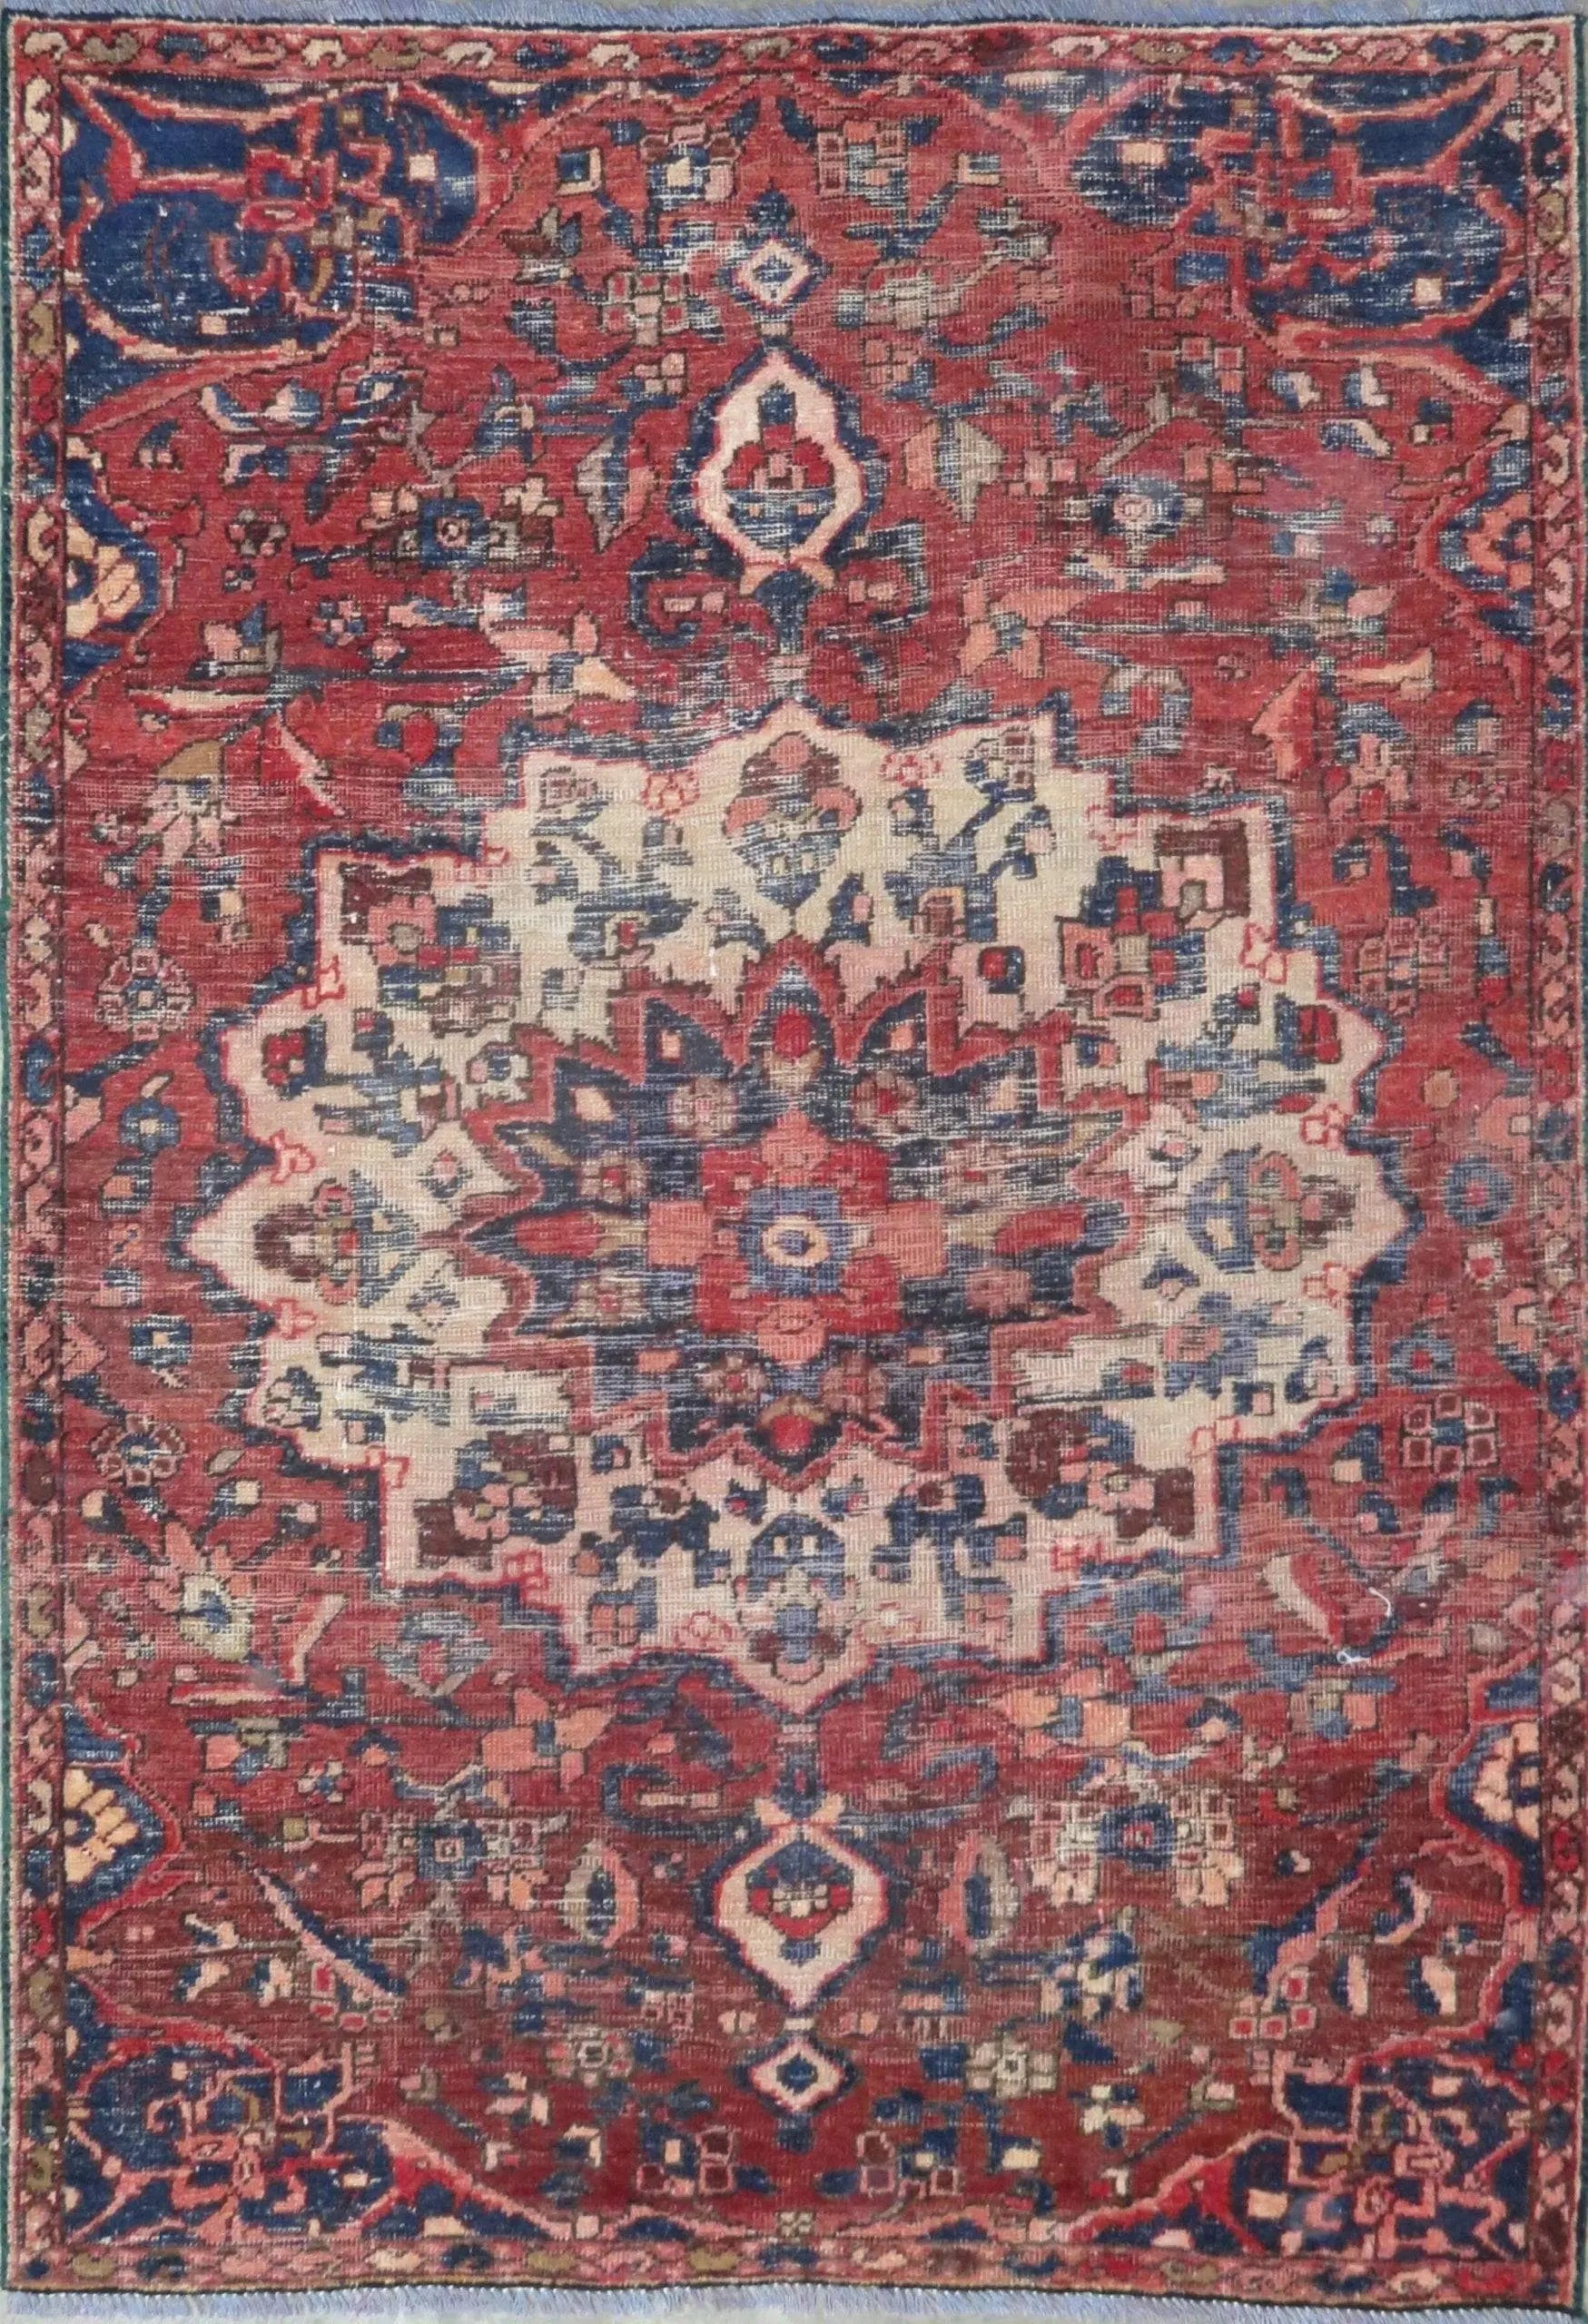 Hand-Knotted Persian Wool Rug _ Luxurious Vintage Design, 6'0" x 4'2", Artisan Crafted